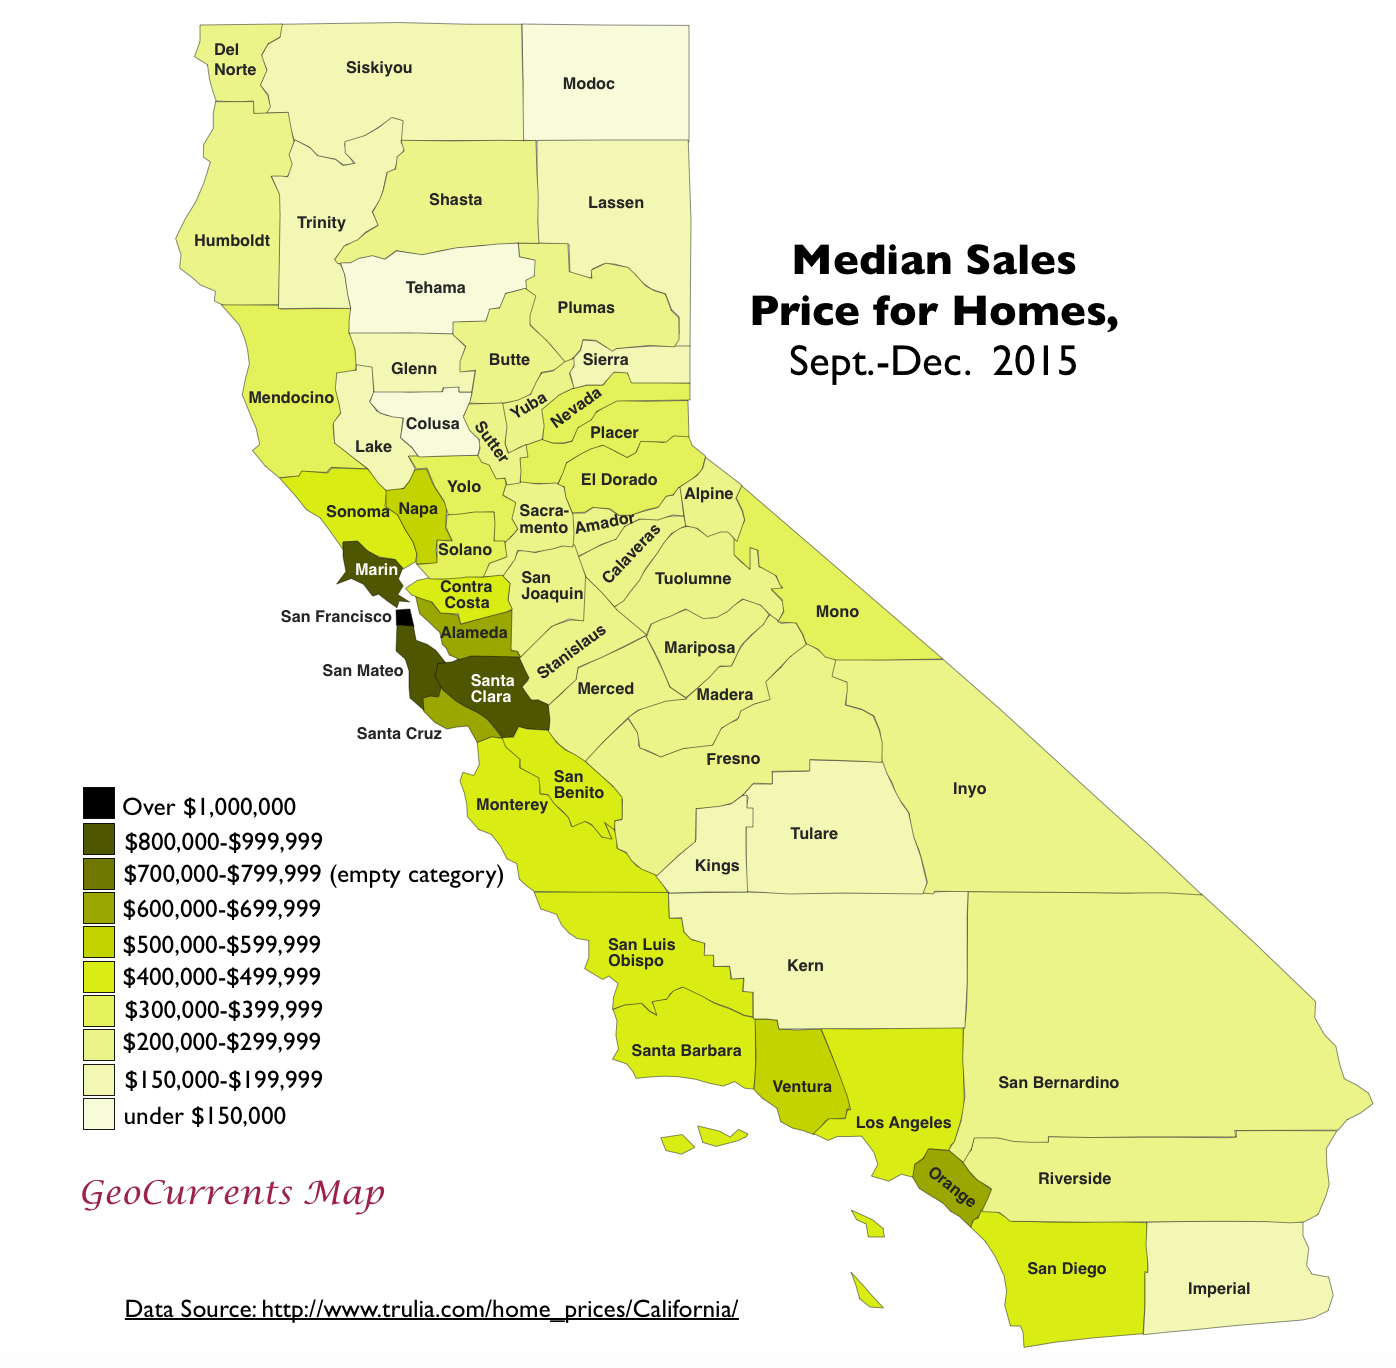 Cost Of Living Map California - Klipy - California Cost Of Living Map